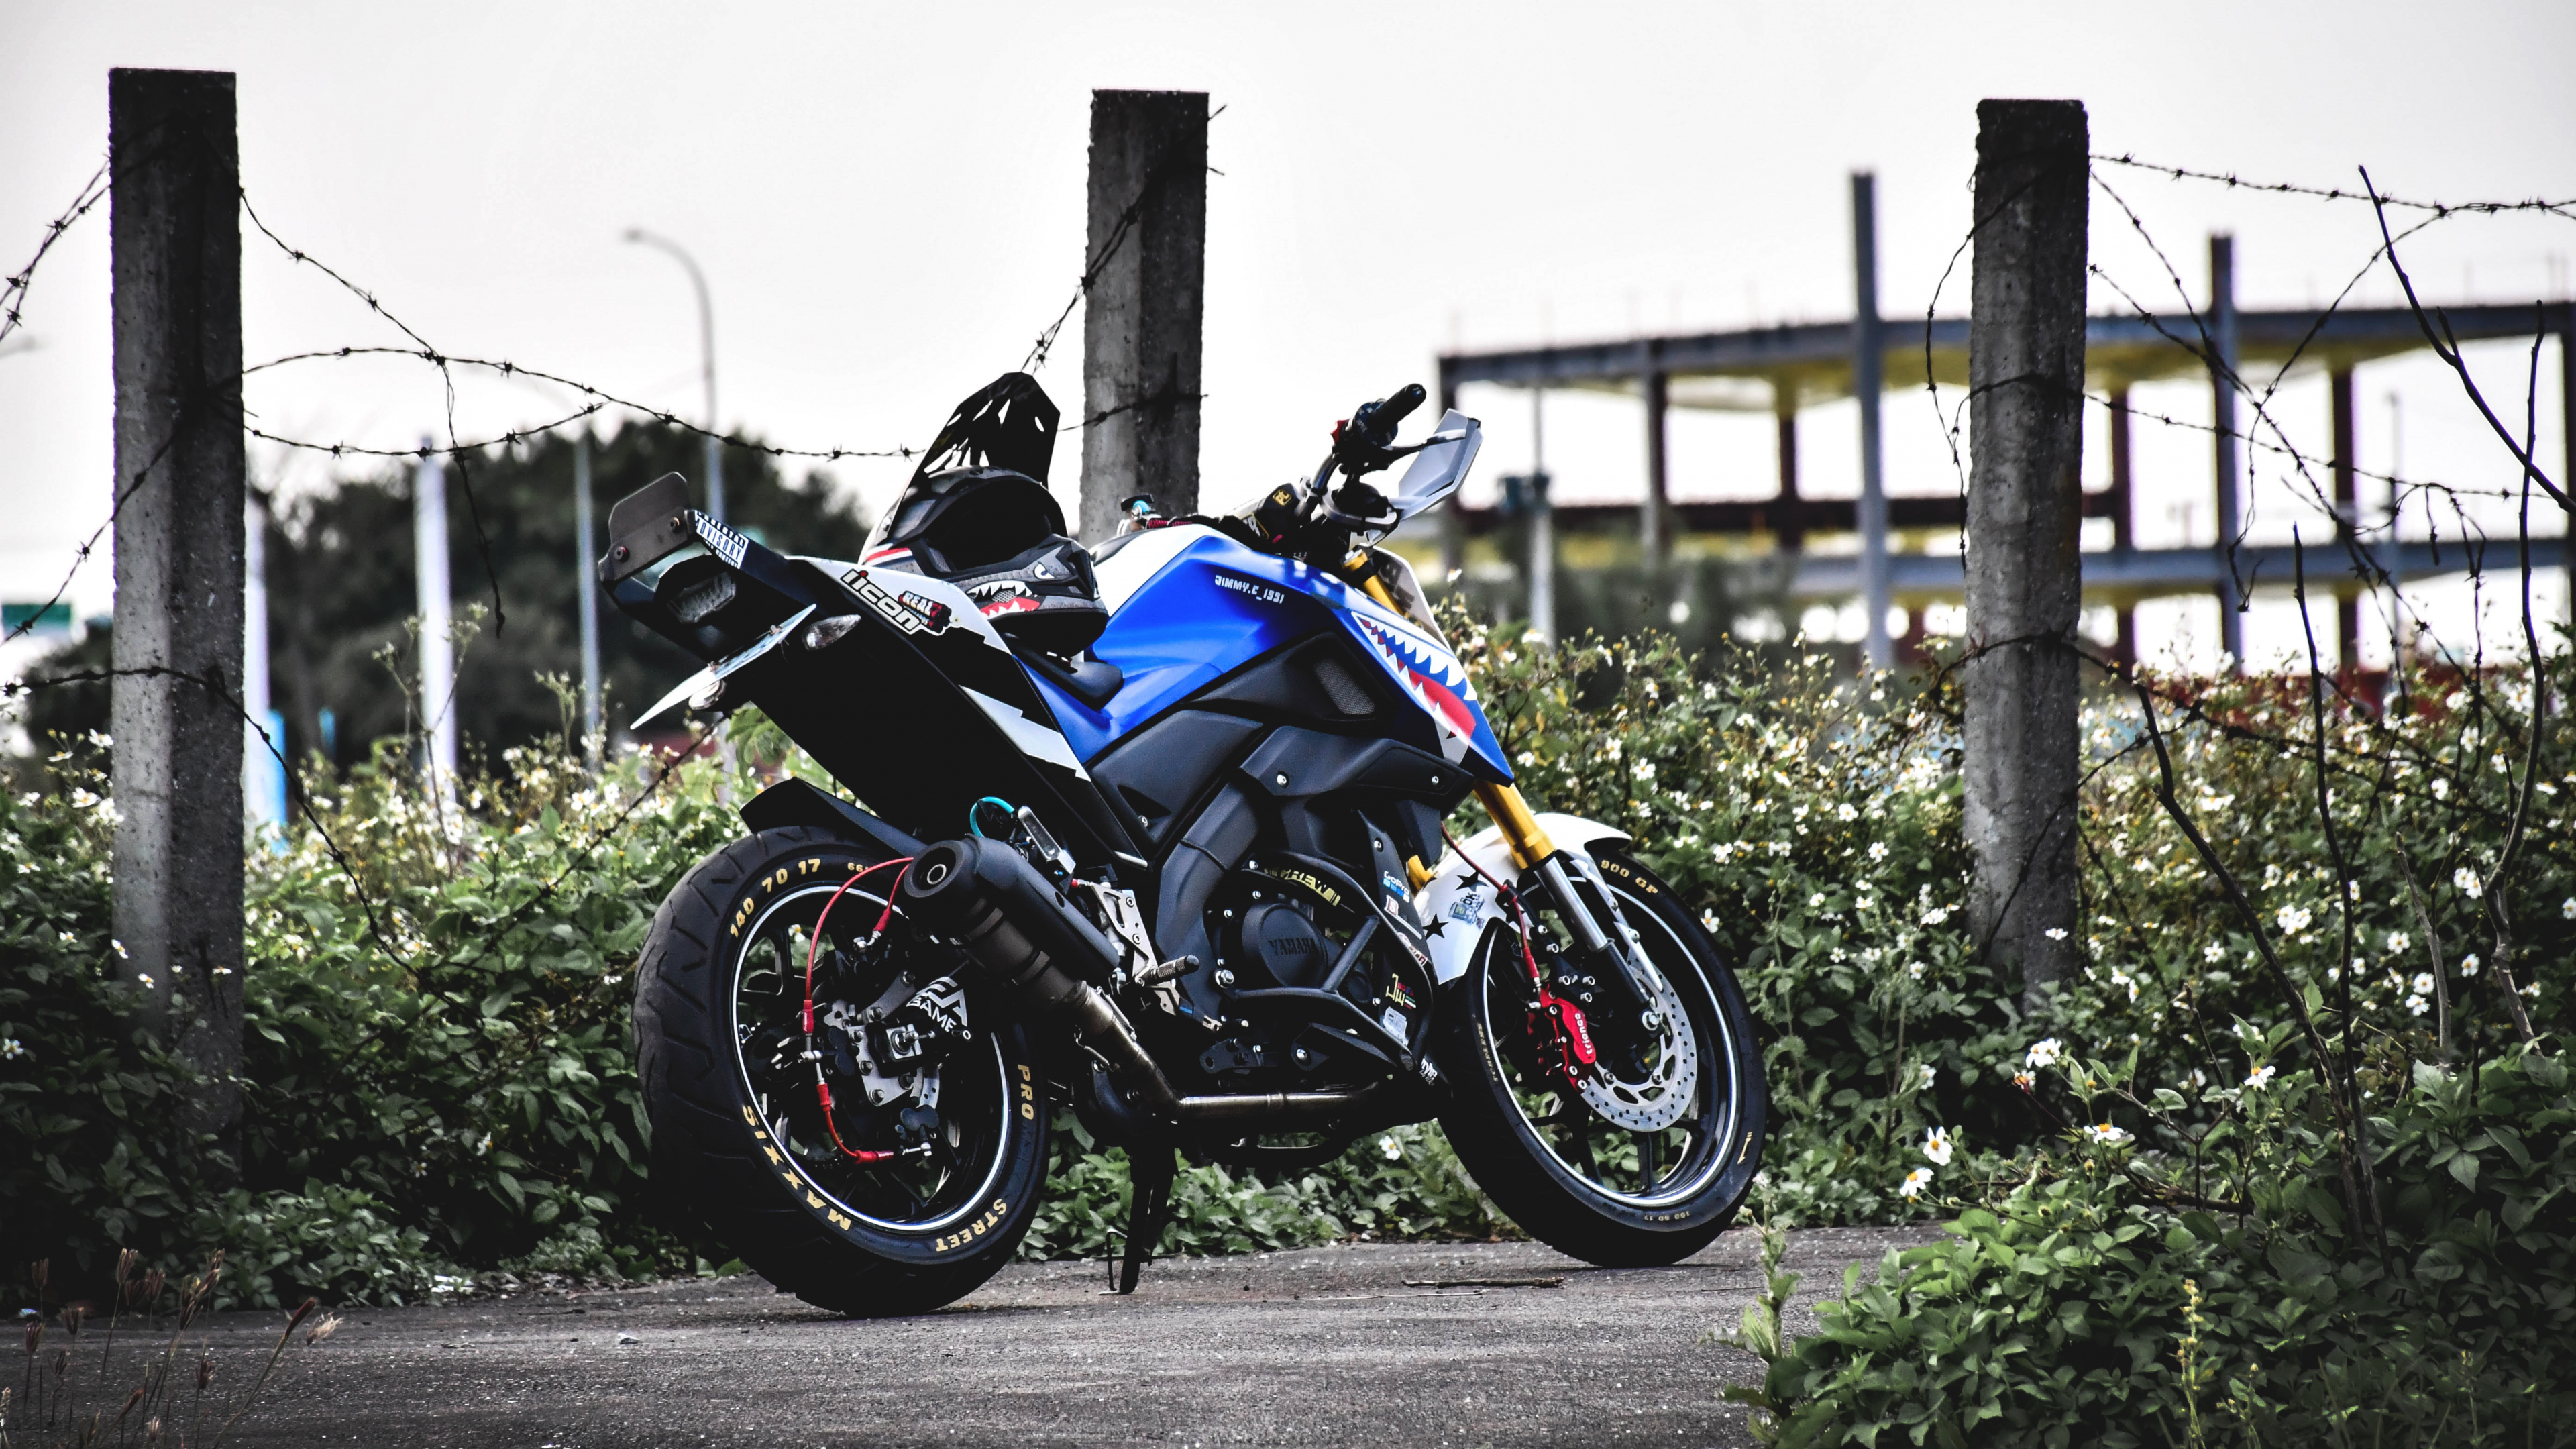 Black and Blue Sports Bike Parked on Gray Concrete Road During Daytime. Wallpaper in 3840x2160 Resolution